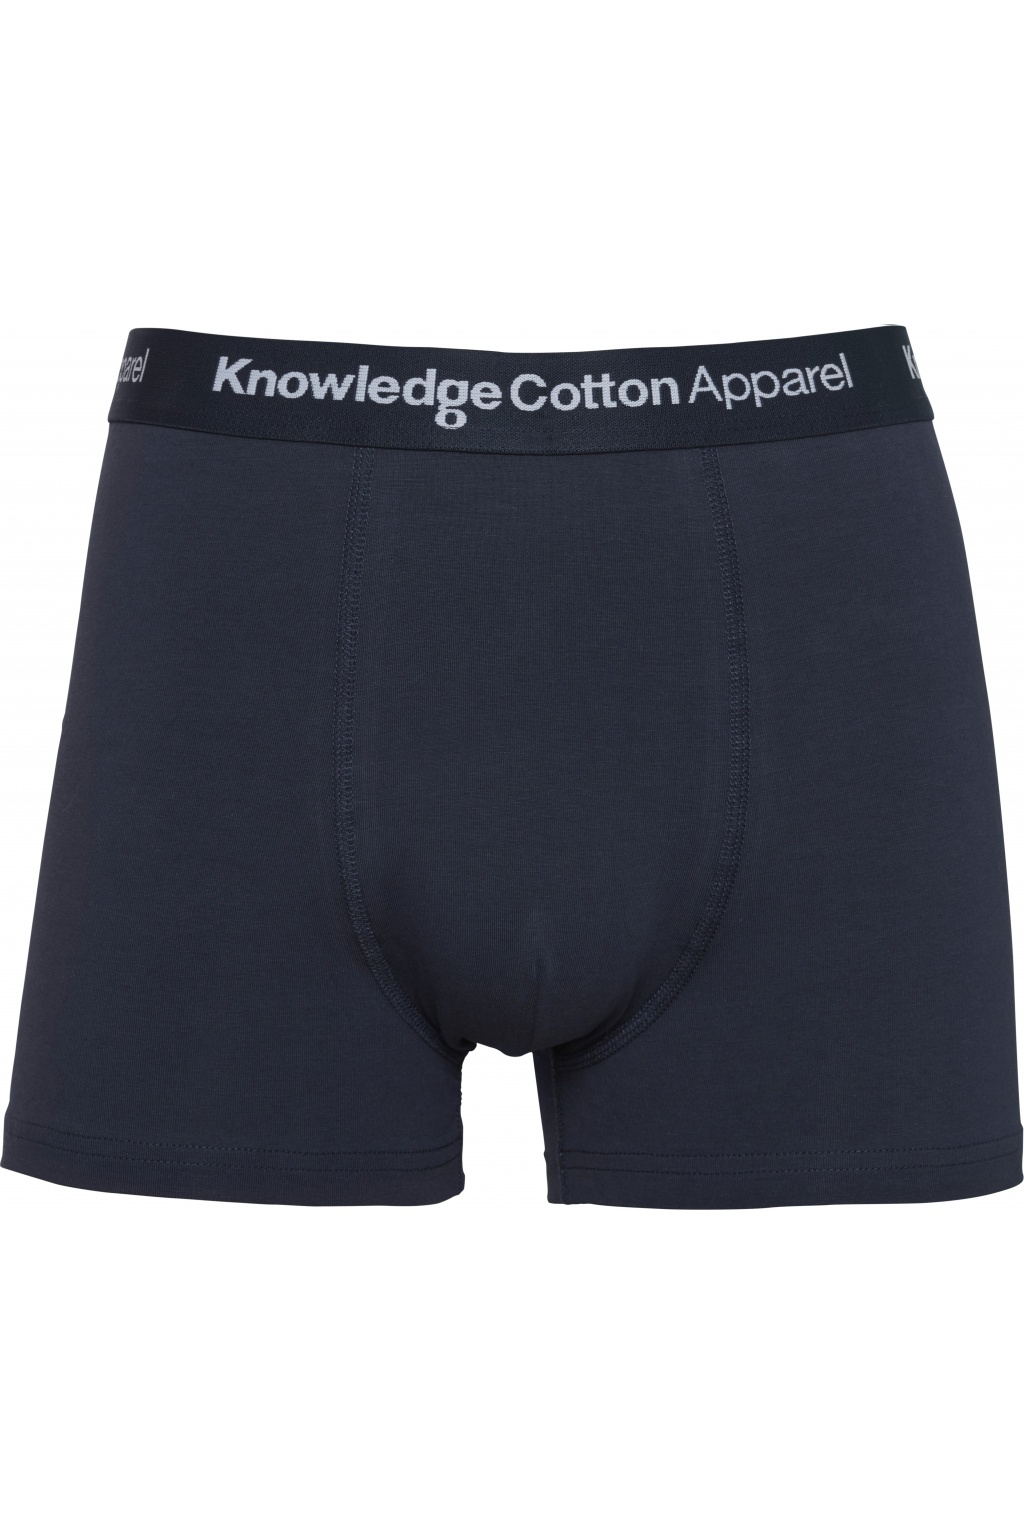 Knowledge Cotton 2 Pack Striped Underwear-Mens-Ohh! By Gum - Shop Sustainable